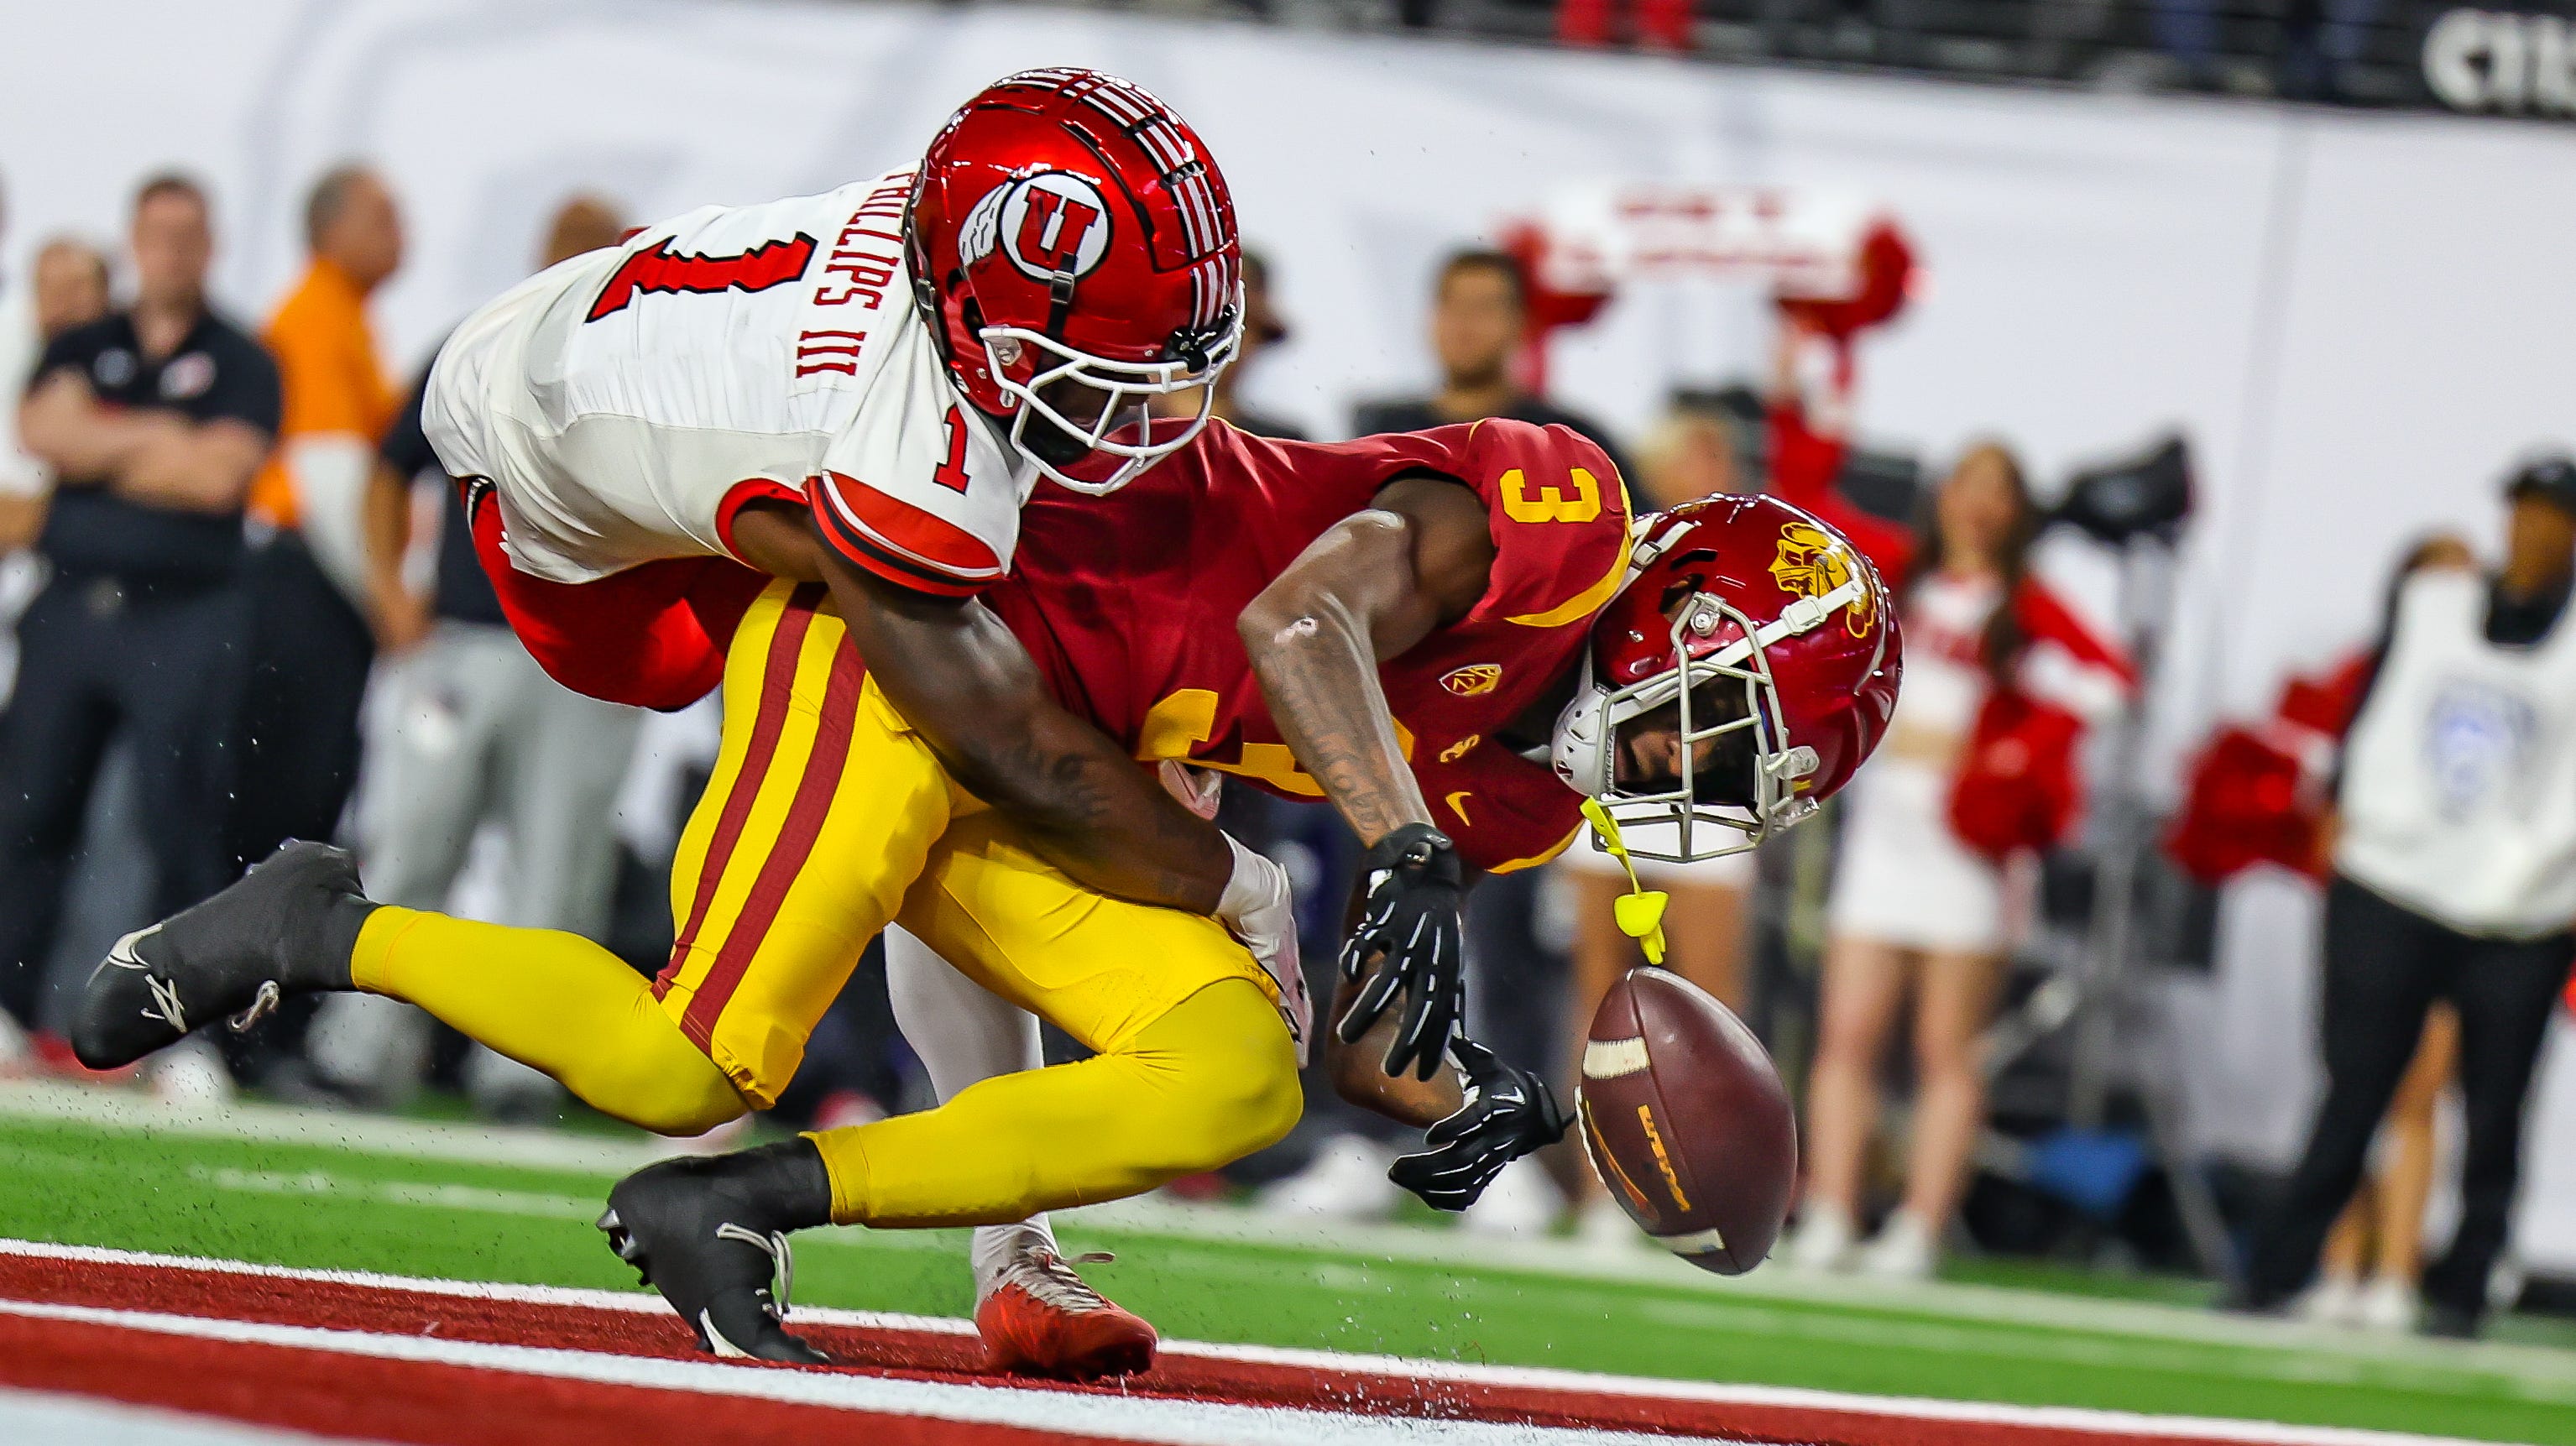 Canzano 2023 Pac12 Conference football schedule is set